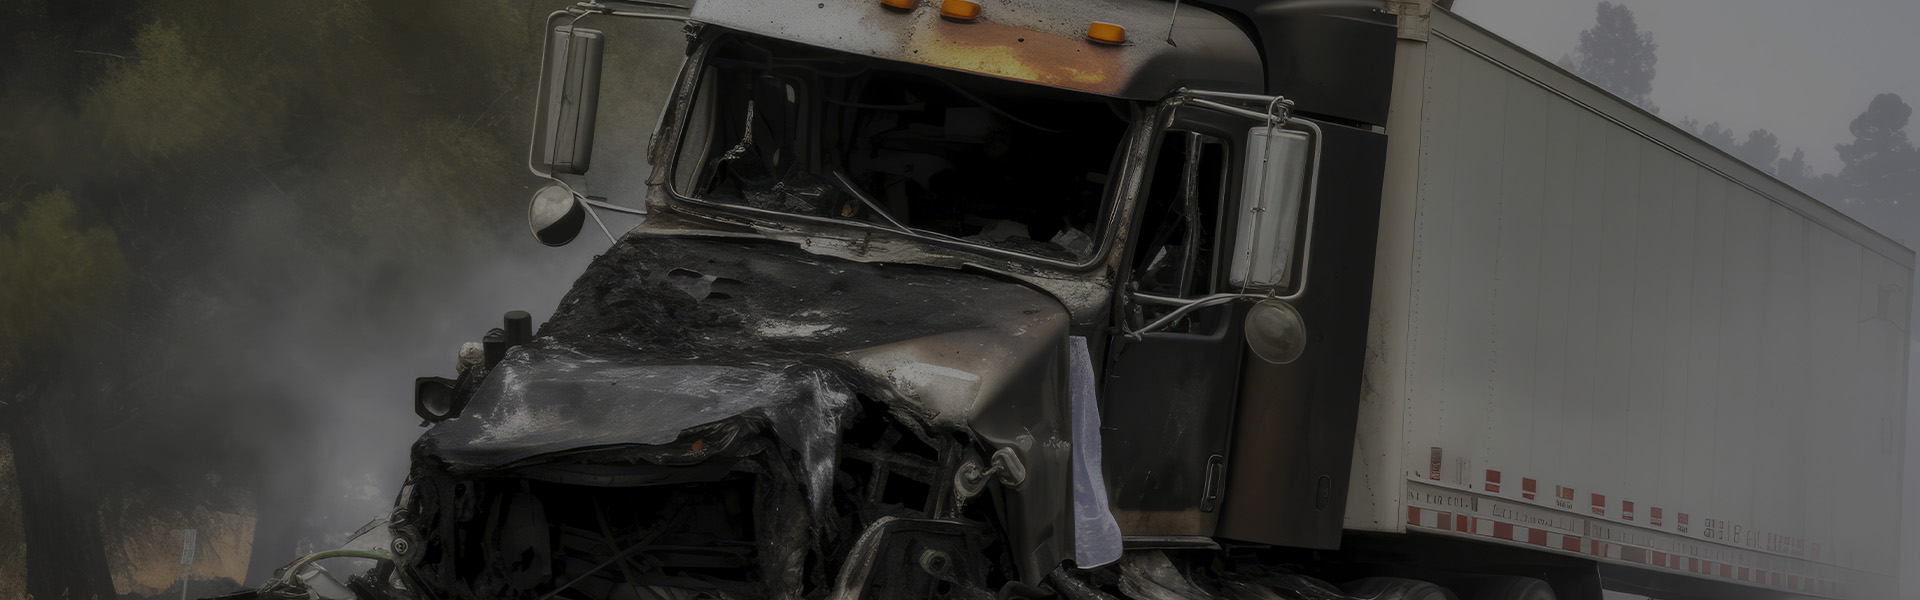 Trucking Accidents overlay | Injury Law Partners - Personal Injury Lawyers